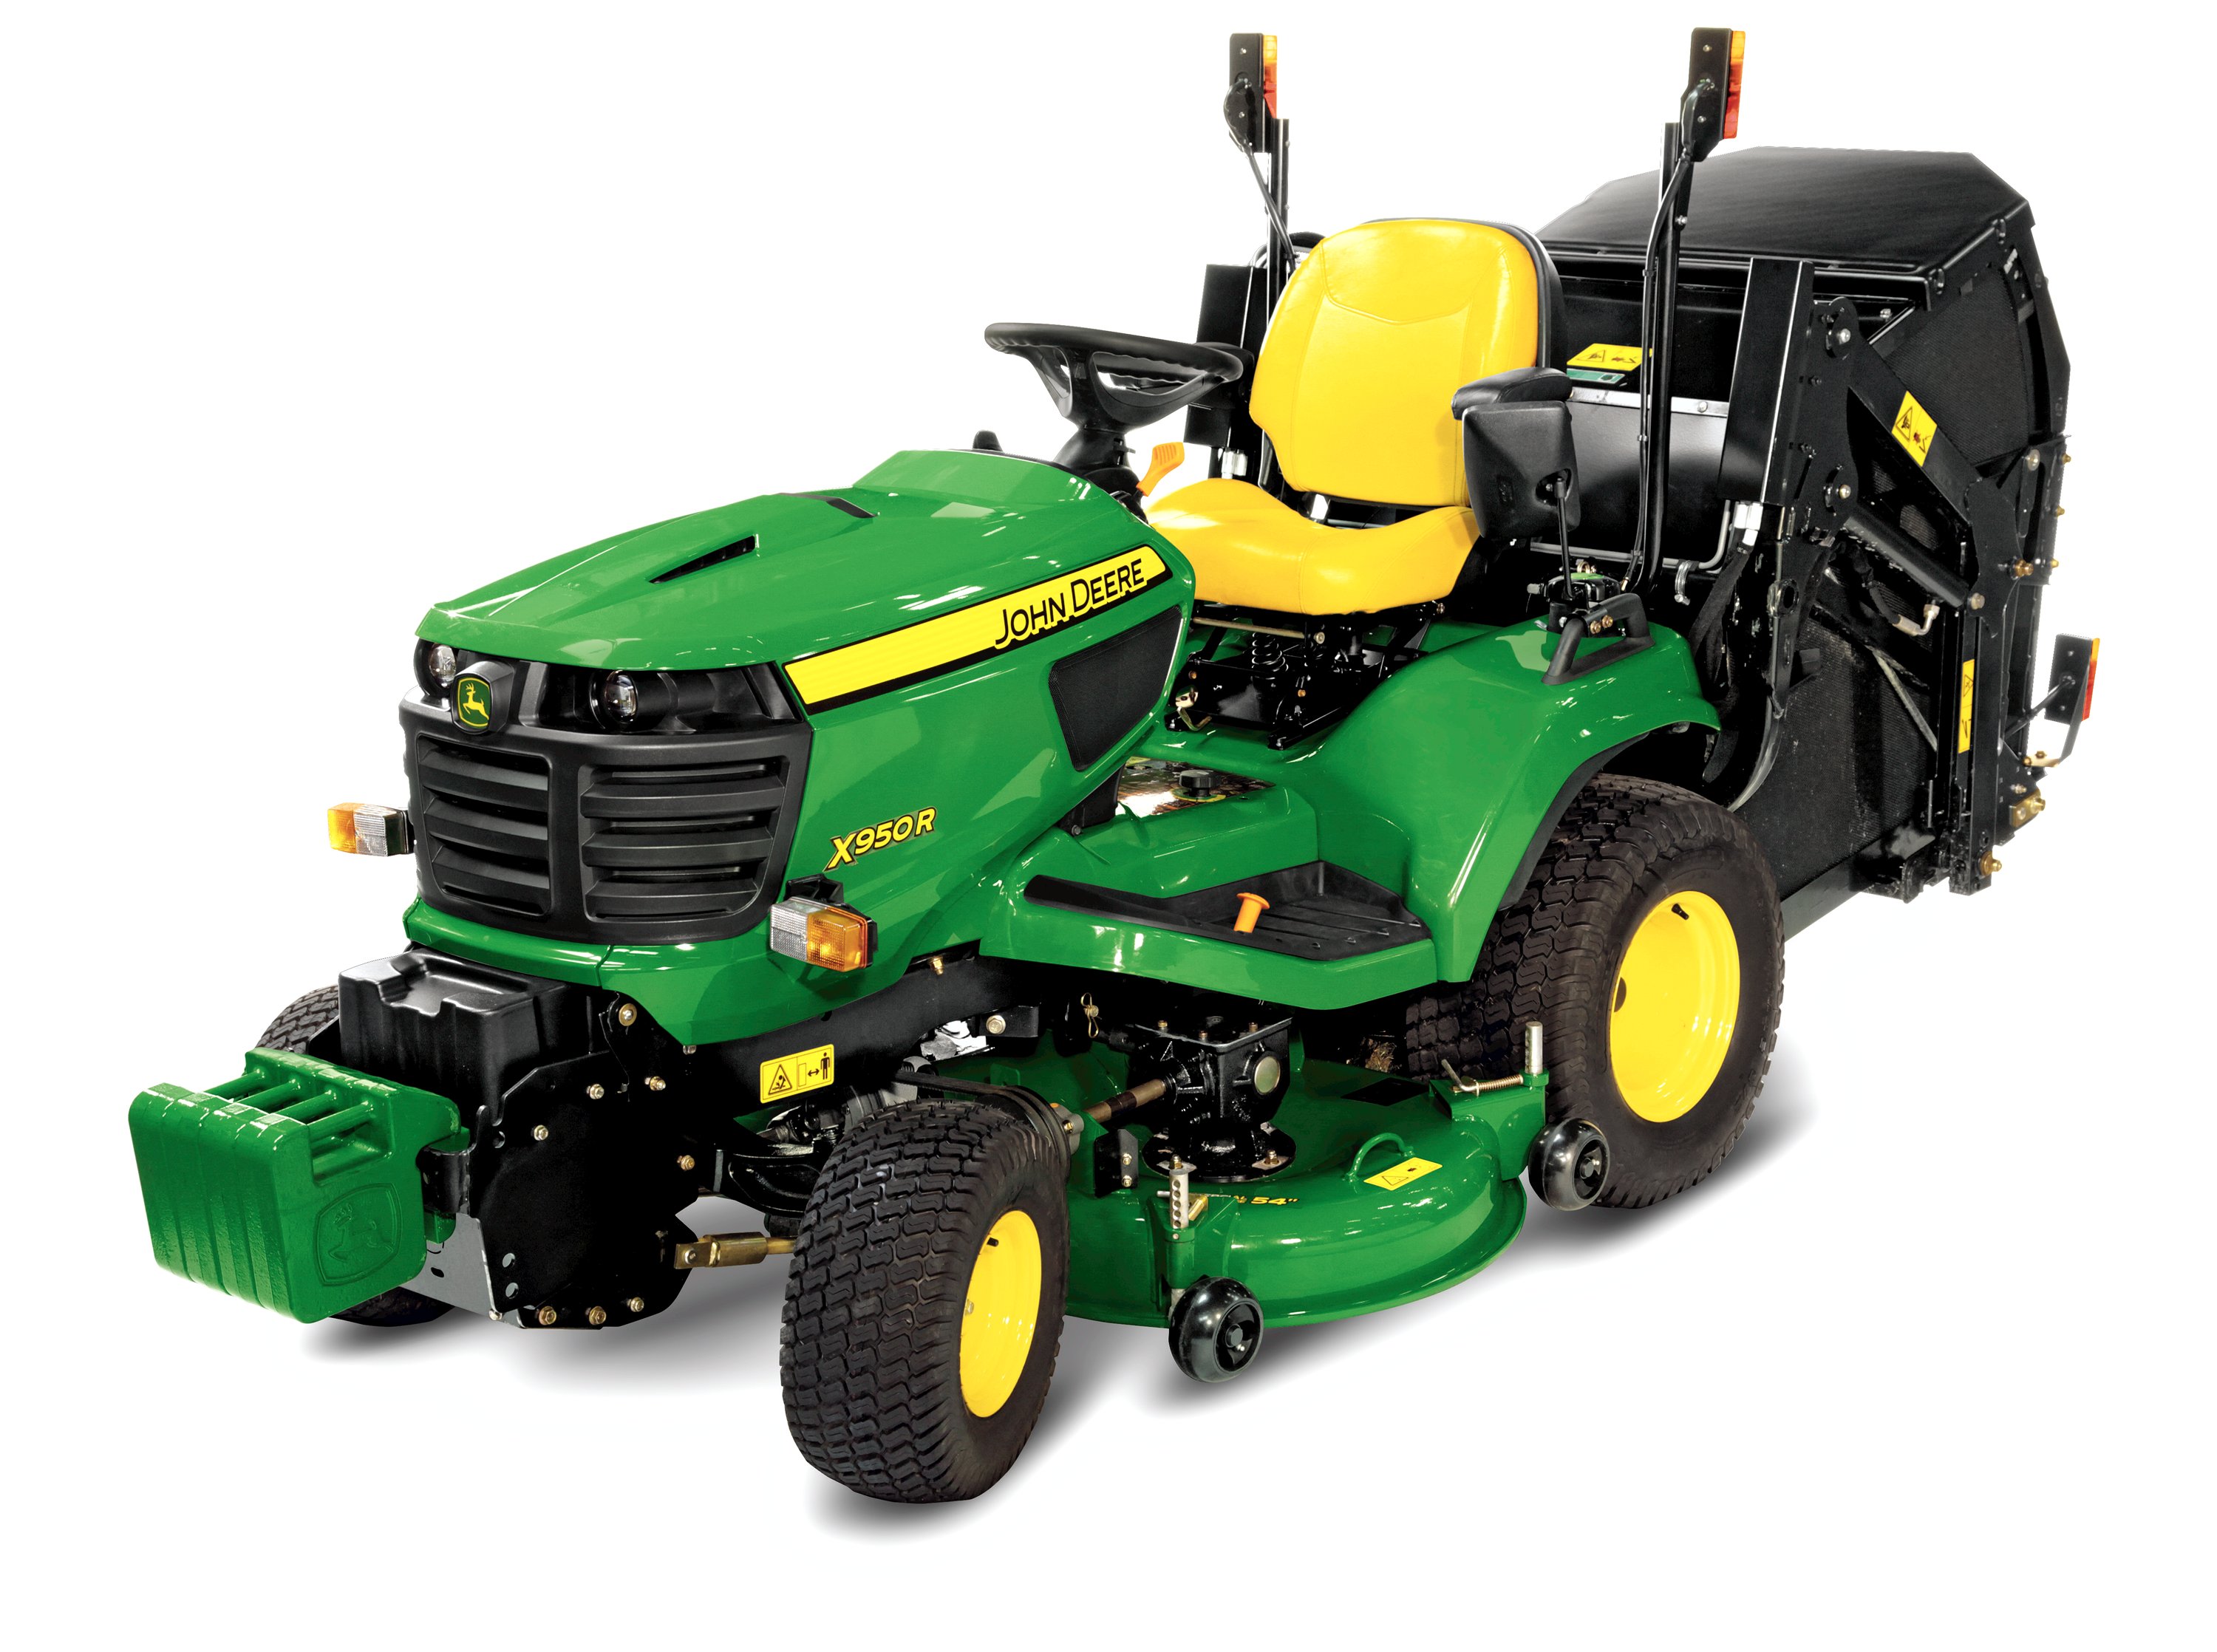 New John Deere lawn tractor at BTME 2014